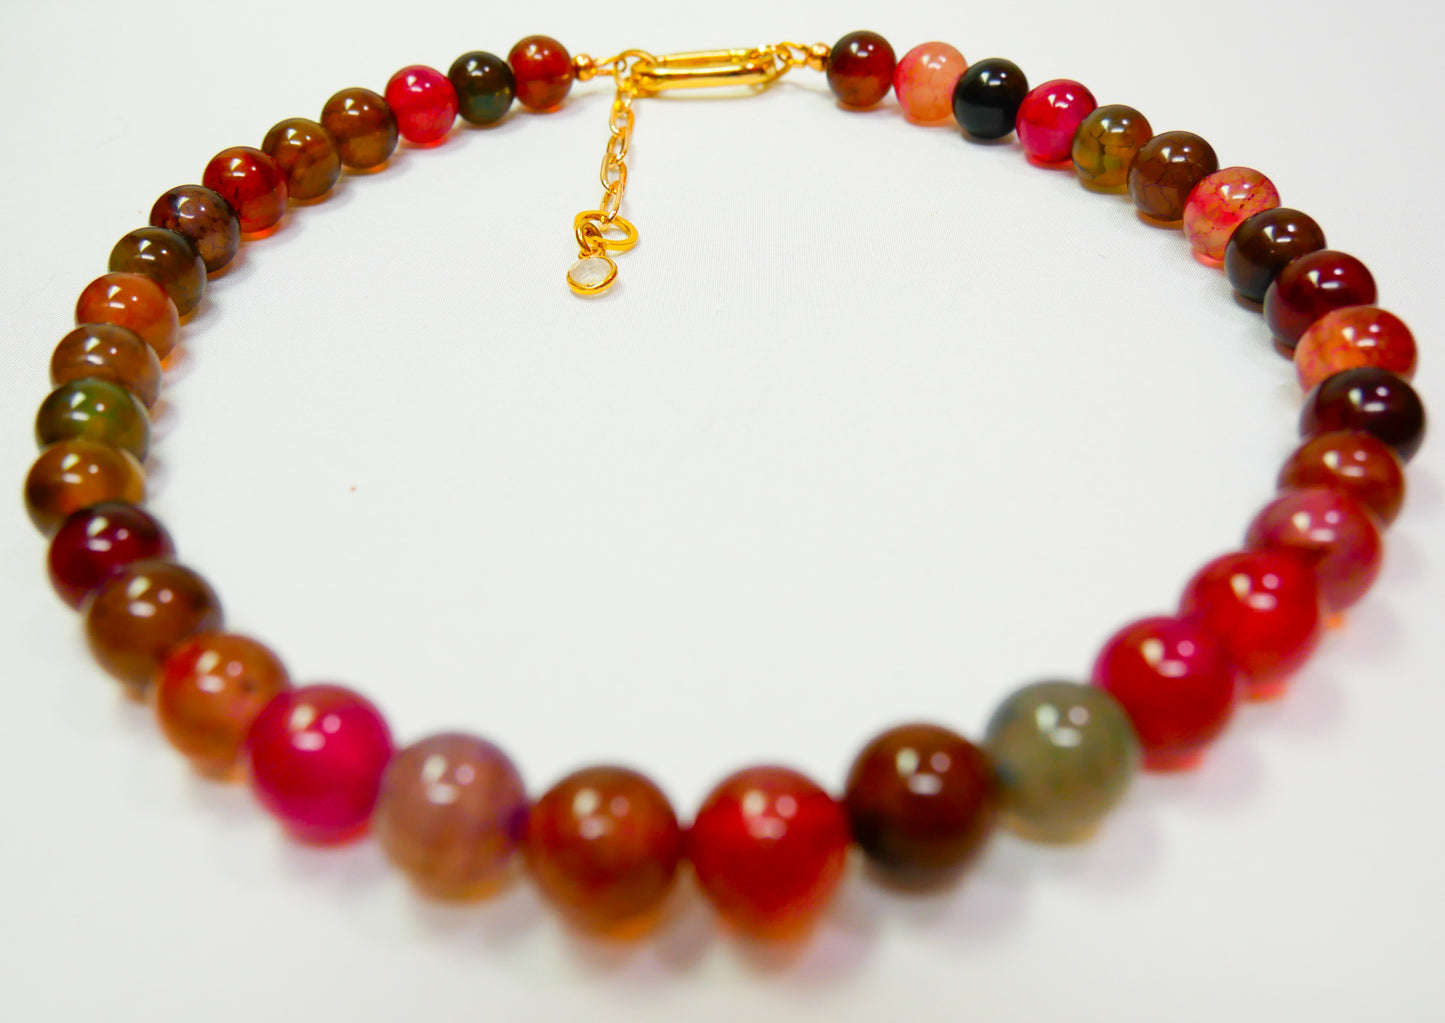 Dragon Vein Agate Choker With Gold-Filled Clasp